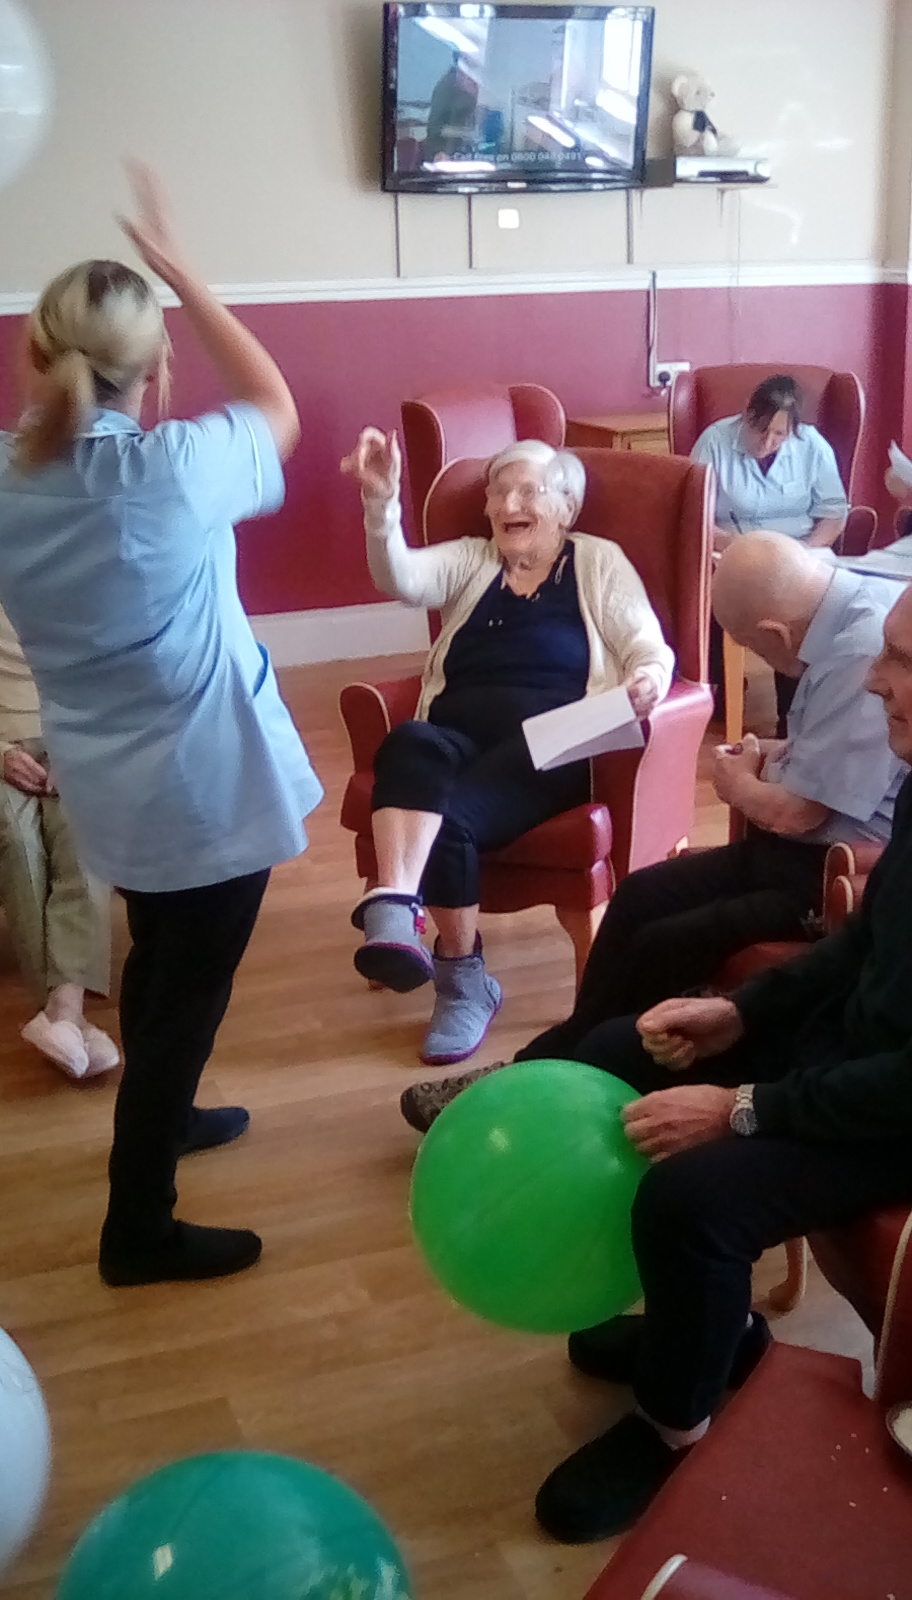 Activities at Victoria House Care Centre during May 2017: Key Healthcare is dedicated to caring for elderly residents in safe. We have multiple dementia care homes including our care home middlesbrough, our care home St. Helen and care home saltburn. We excel in monitoring and improving care levels.